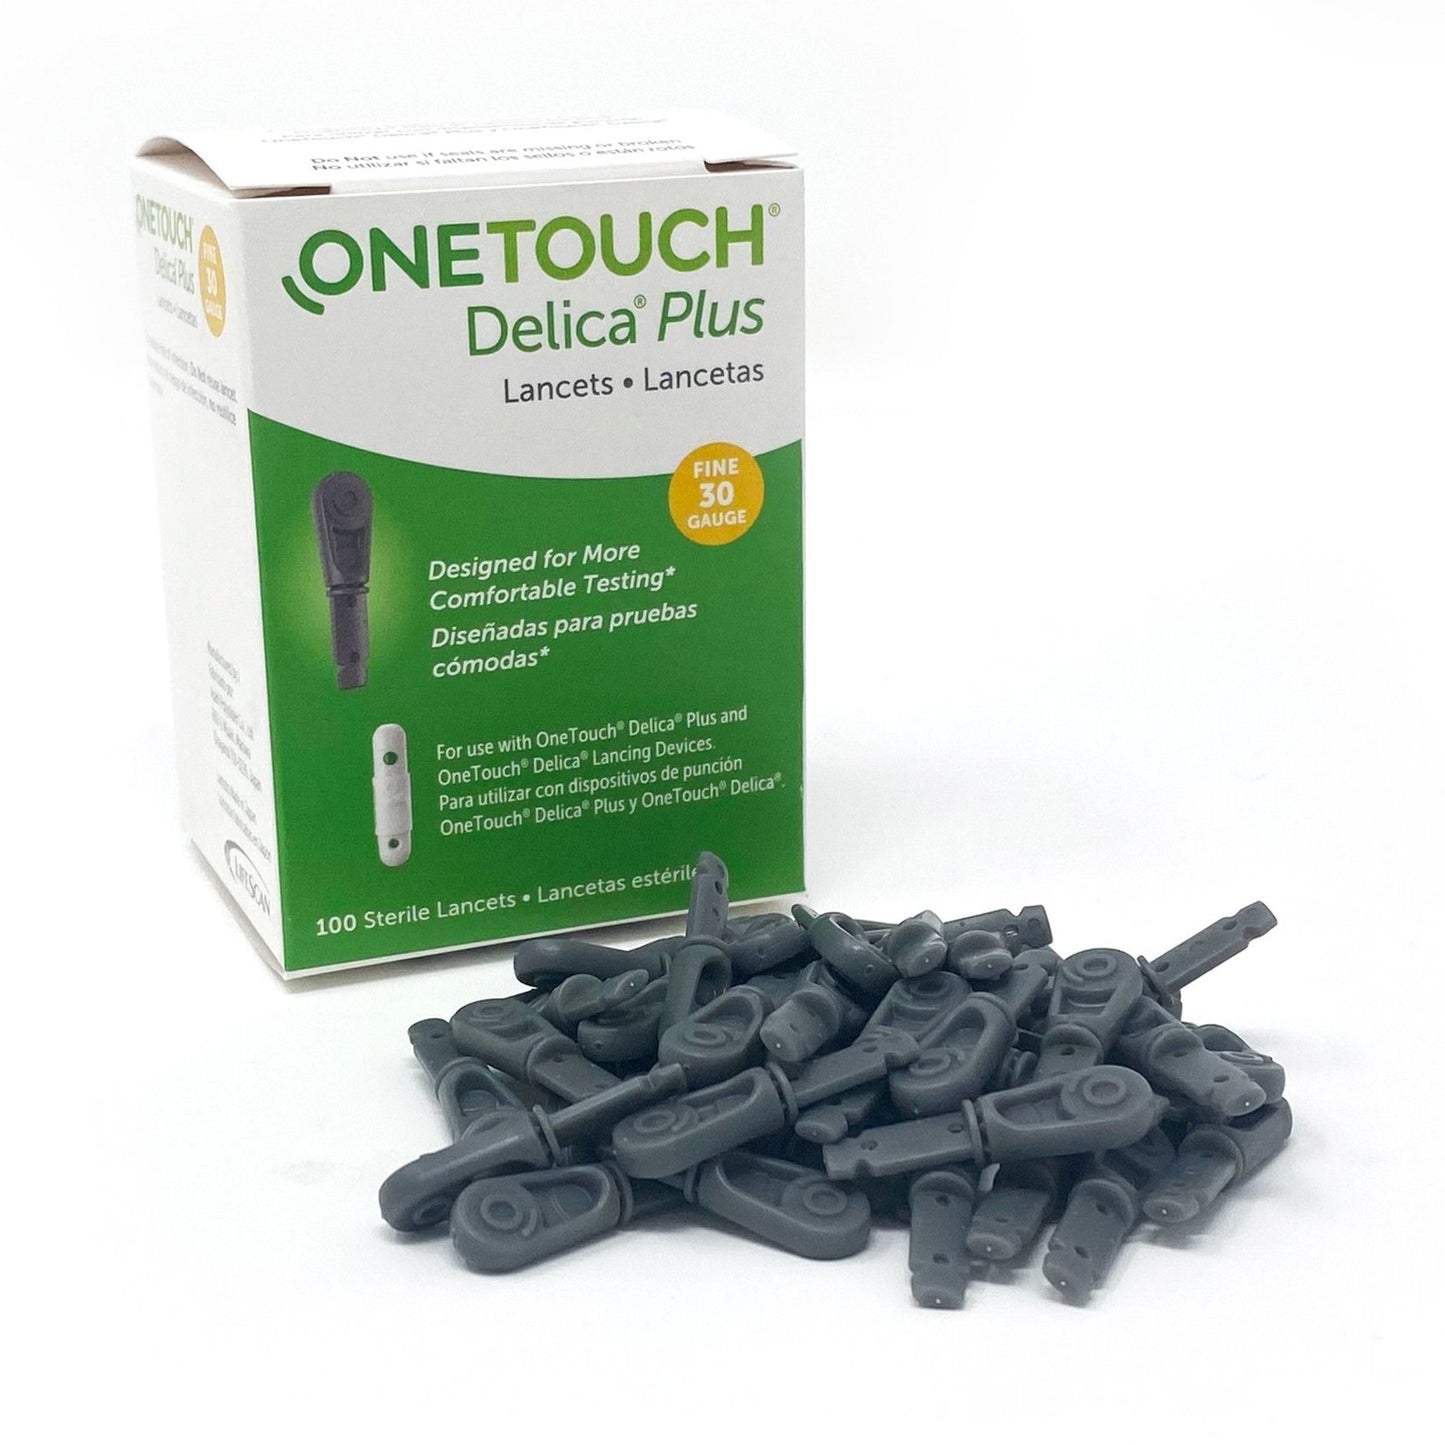 OneTouch Delica Plus Lancets for Diabetes Testing, 100 ct